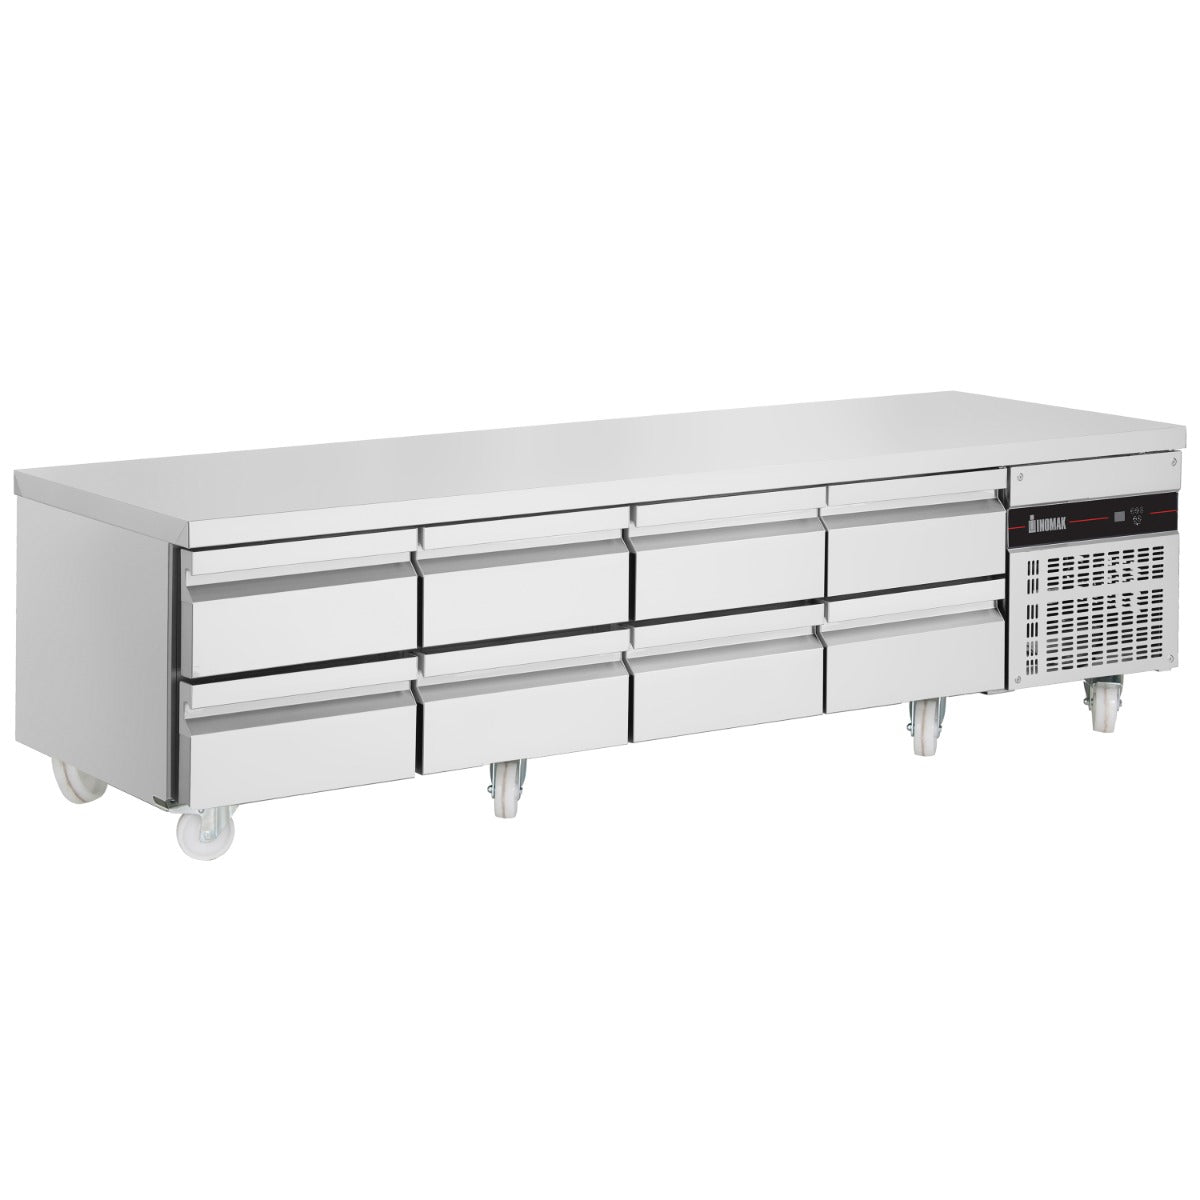 Inomak 8 DRAWER LOW HEIGHT 620MM SNACK COUNTER 334L